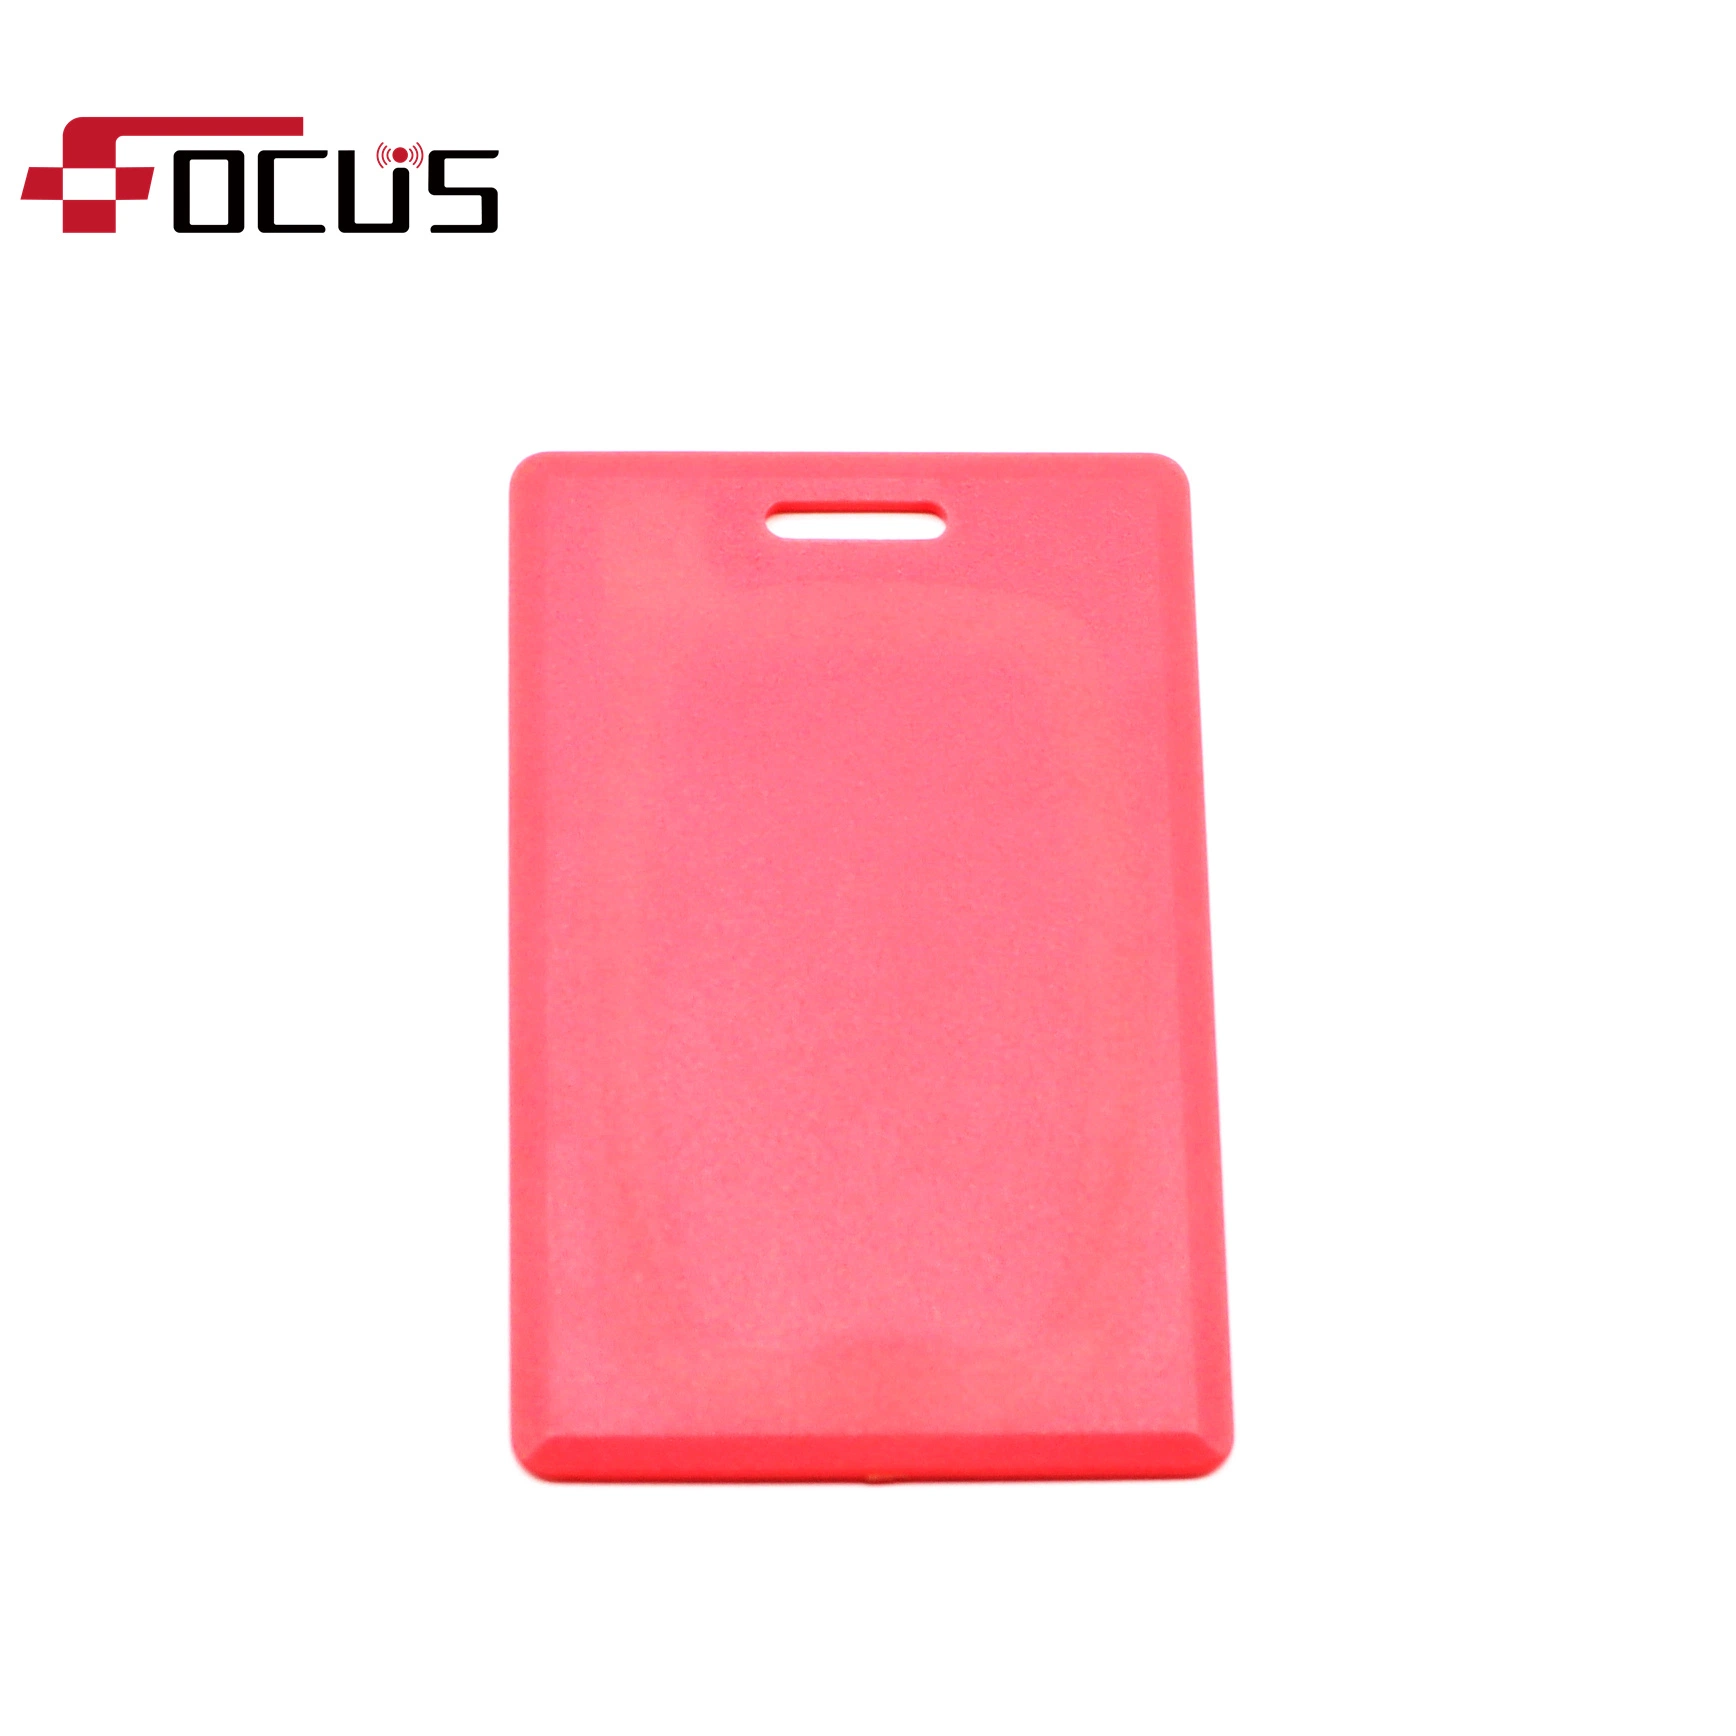 Factory Price Blank ID Card for Access Control and Student ID Card